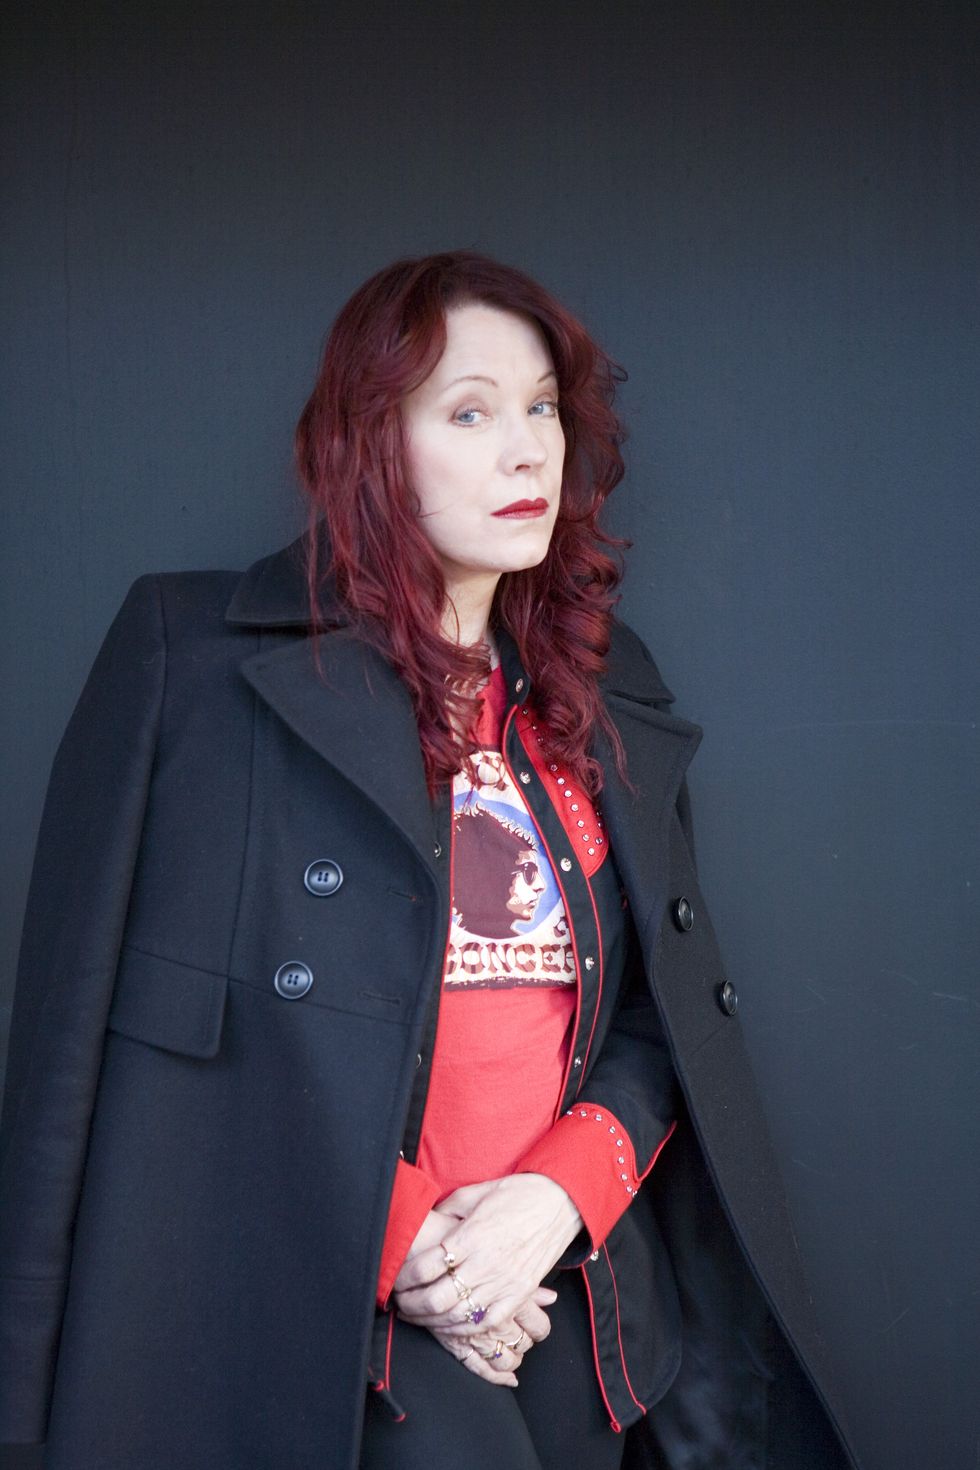 pamela des barres, writer and former rock and roll groupie, portrait, torino turin, italy, 15th november 2007 photo by leonardo cendamogetty images